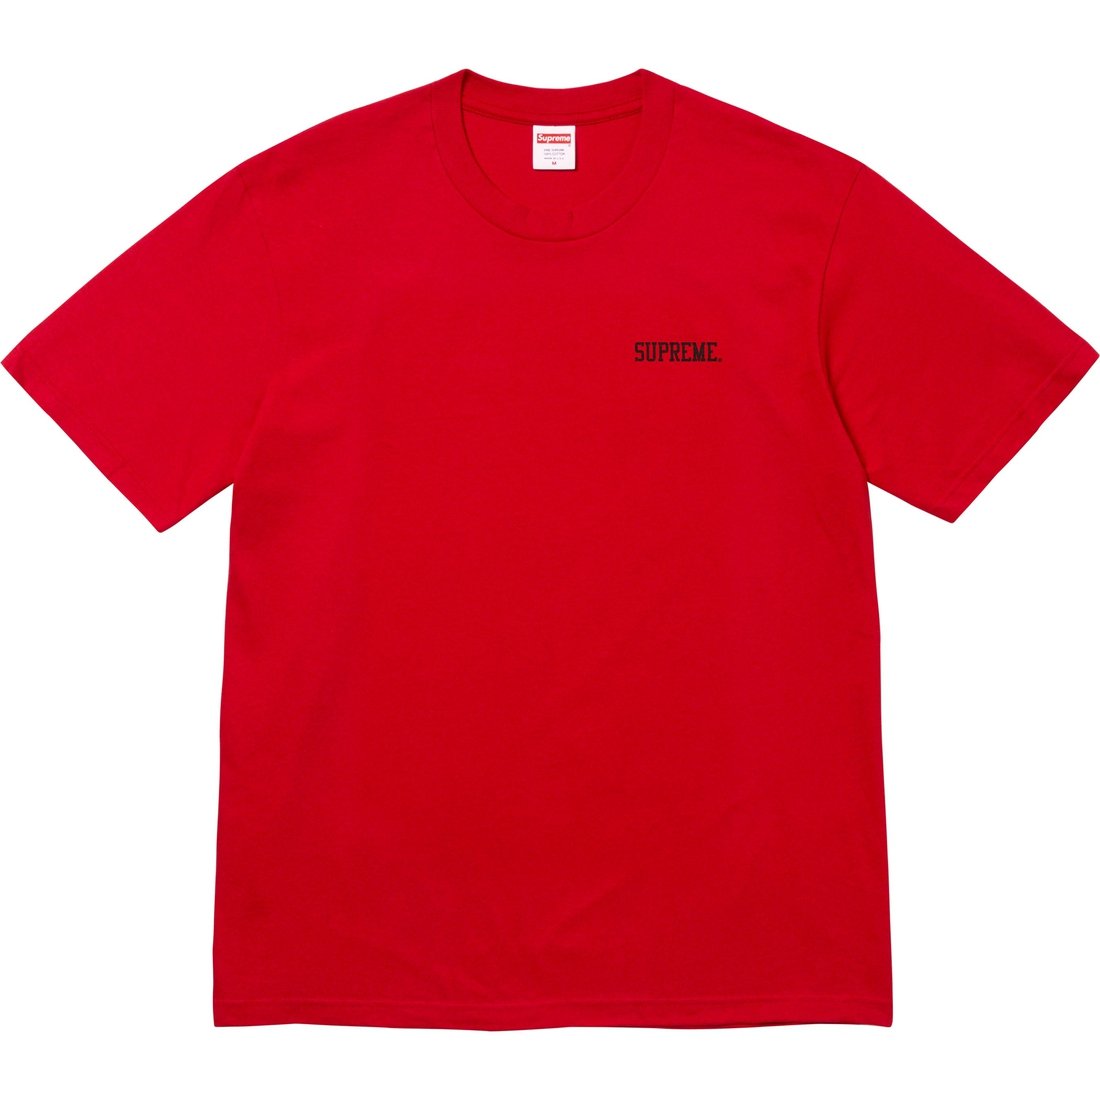 SUPREME FIGHTER TEE-RED - Popcorn Store